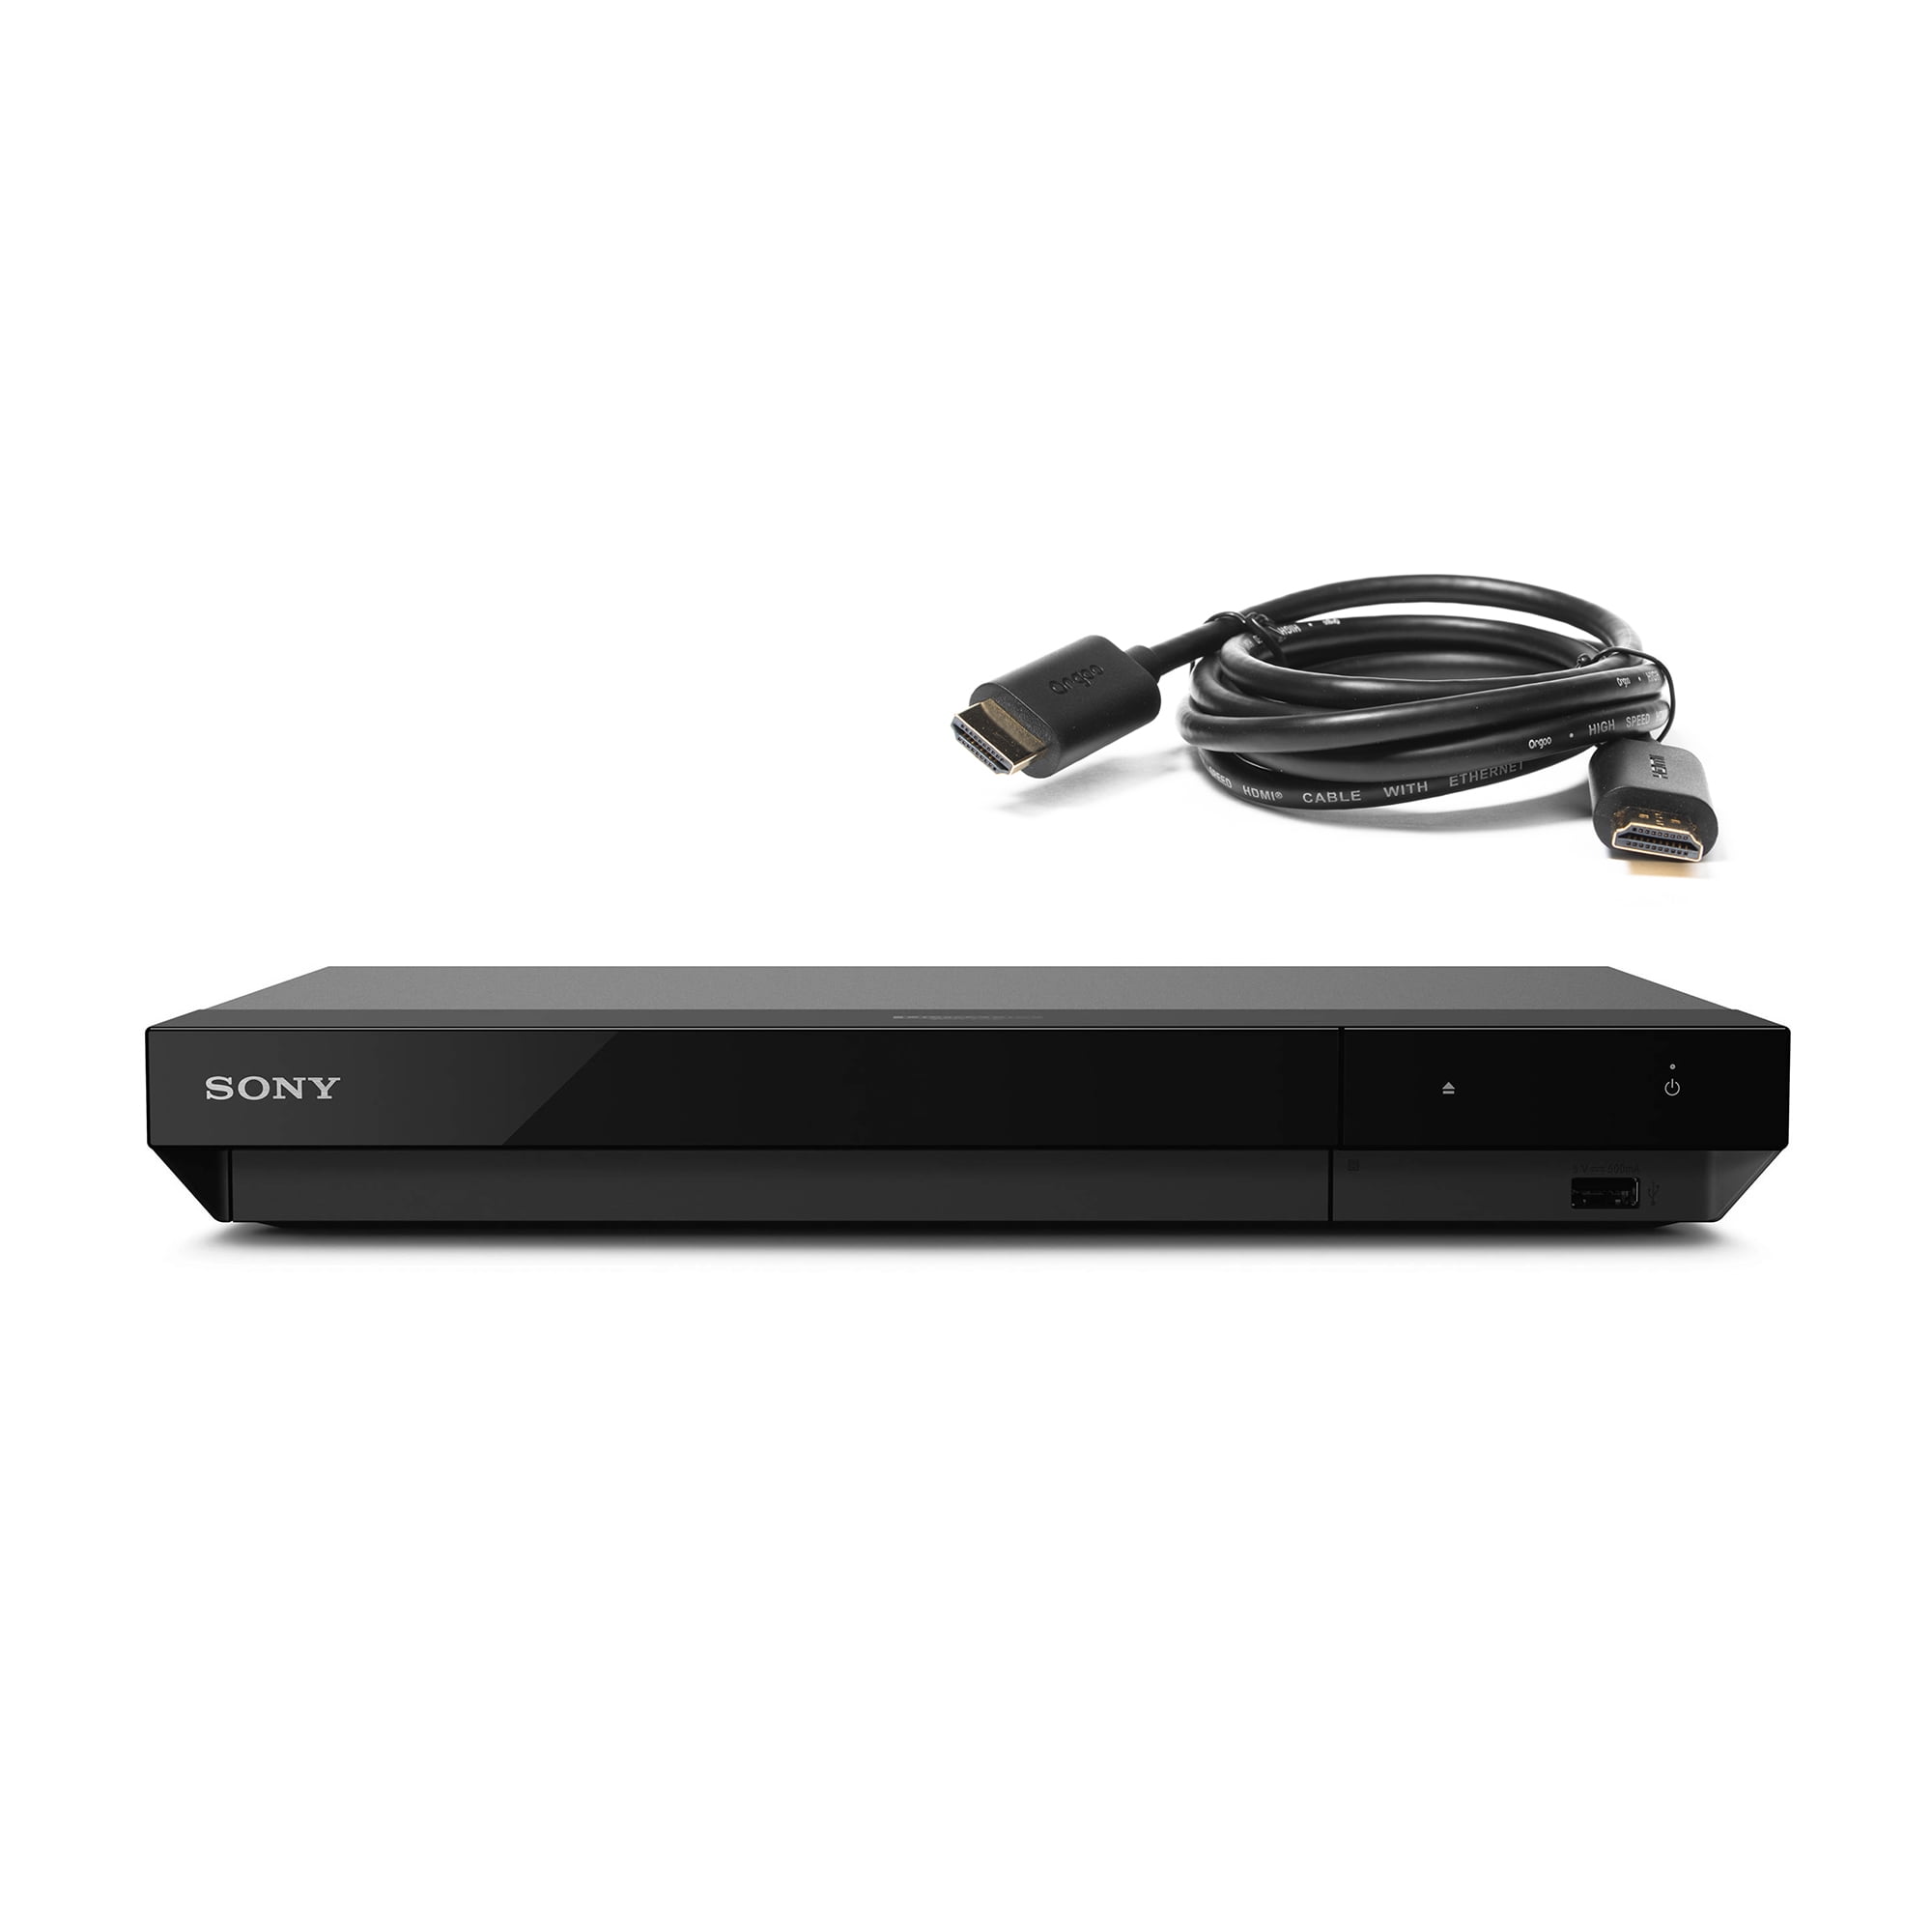 Sony UBP-X700 4K Ultra HD Streaming Blu-Ray Player (Comes with a Premium 6  Foot HDMI Cable by Orgoo)